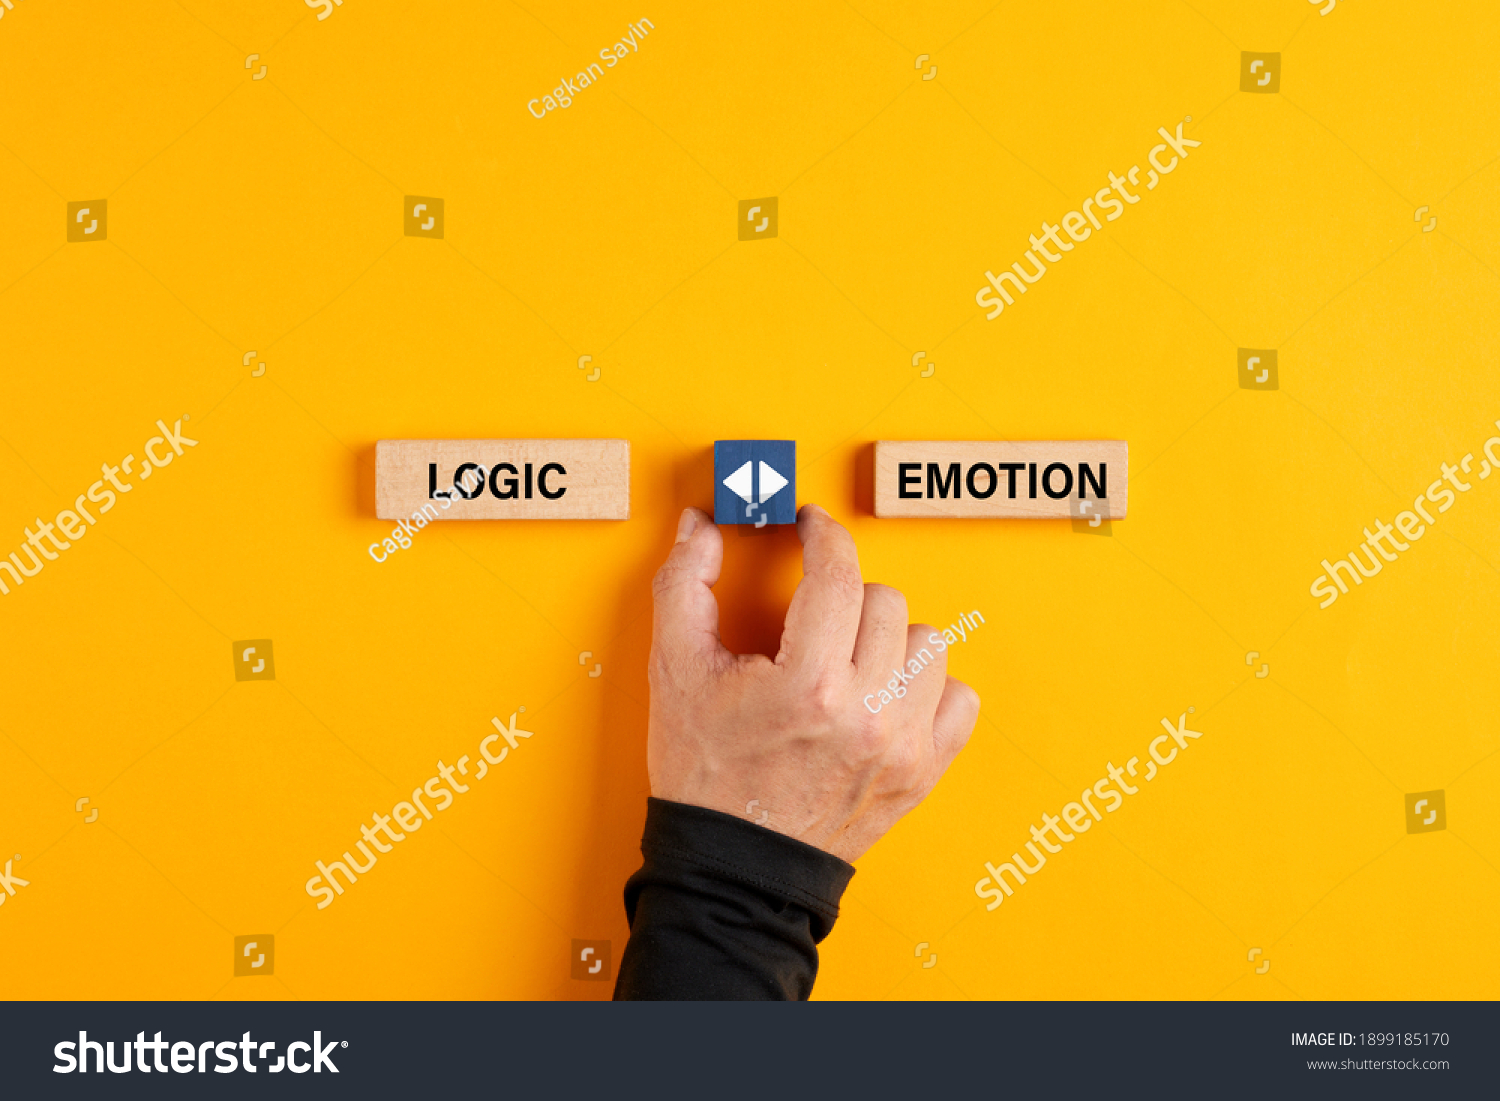 Male hand holds a wooden cube with arrow icon between the options of logic or emotion. Emotional or logical decision making concept.

 #1899185170